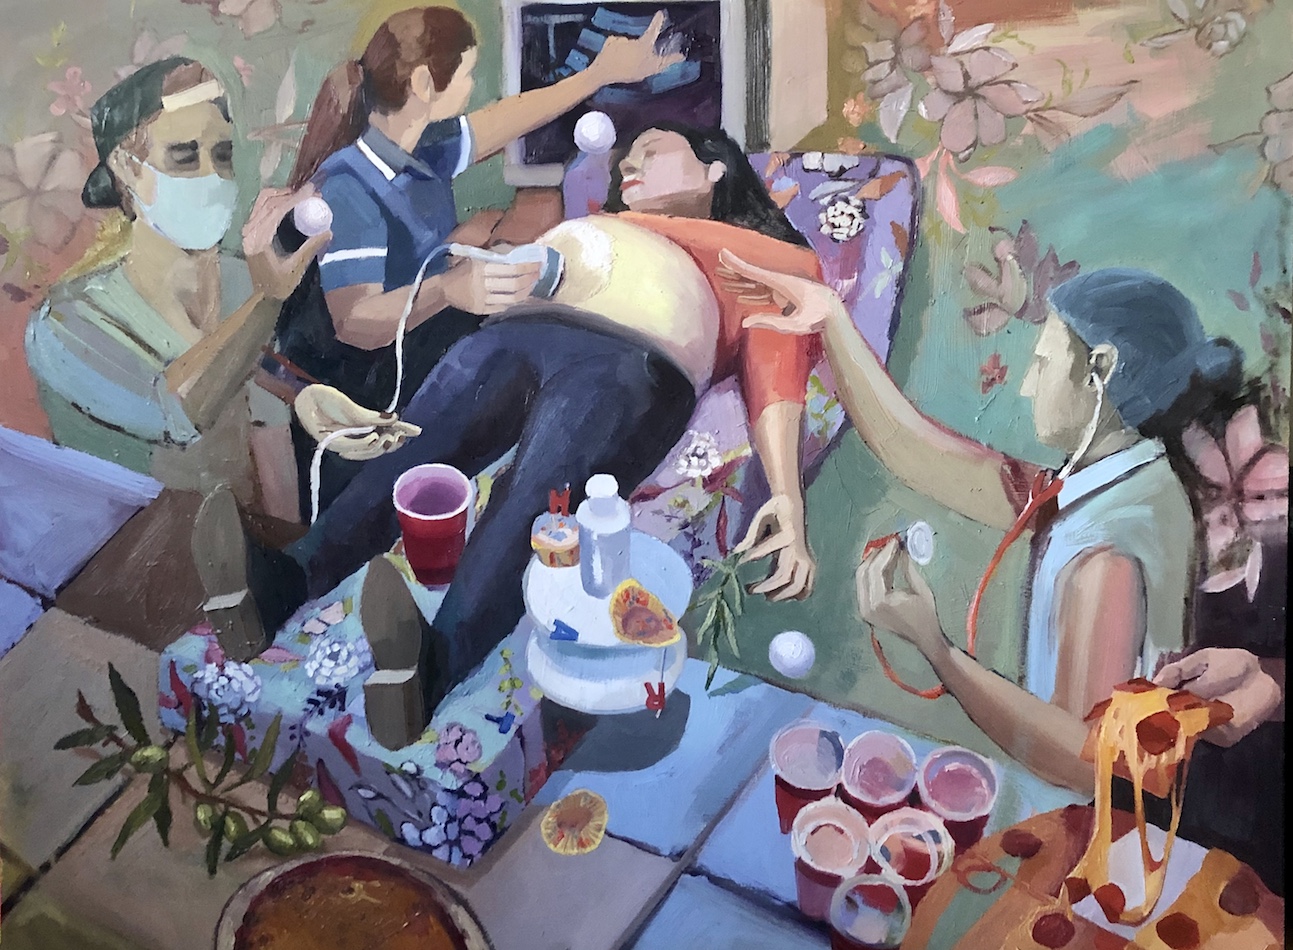 Women laying on a medical bed getting an ultrasound by a nurse. A red solo cup is between pregnant woman’s legs. The nurse is pointing to the ultrasound screen behind the laying woman’s head. The bed has a floral design that also fades into the background of the painting. Two young men are playing beer pong in front of the bed. They are wearing medical equipment. A facemask, hairnet, and a stethoscope. The beer pong table is covered in eaten pizza and cupcakes. The woman is holding an olive branch in between her fingers and there is another olive branch under her feet.